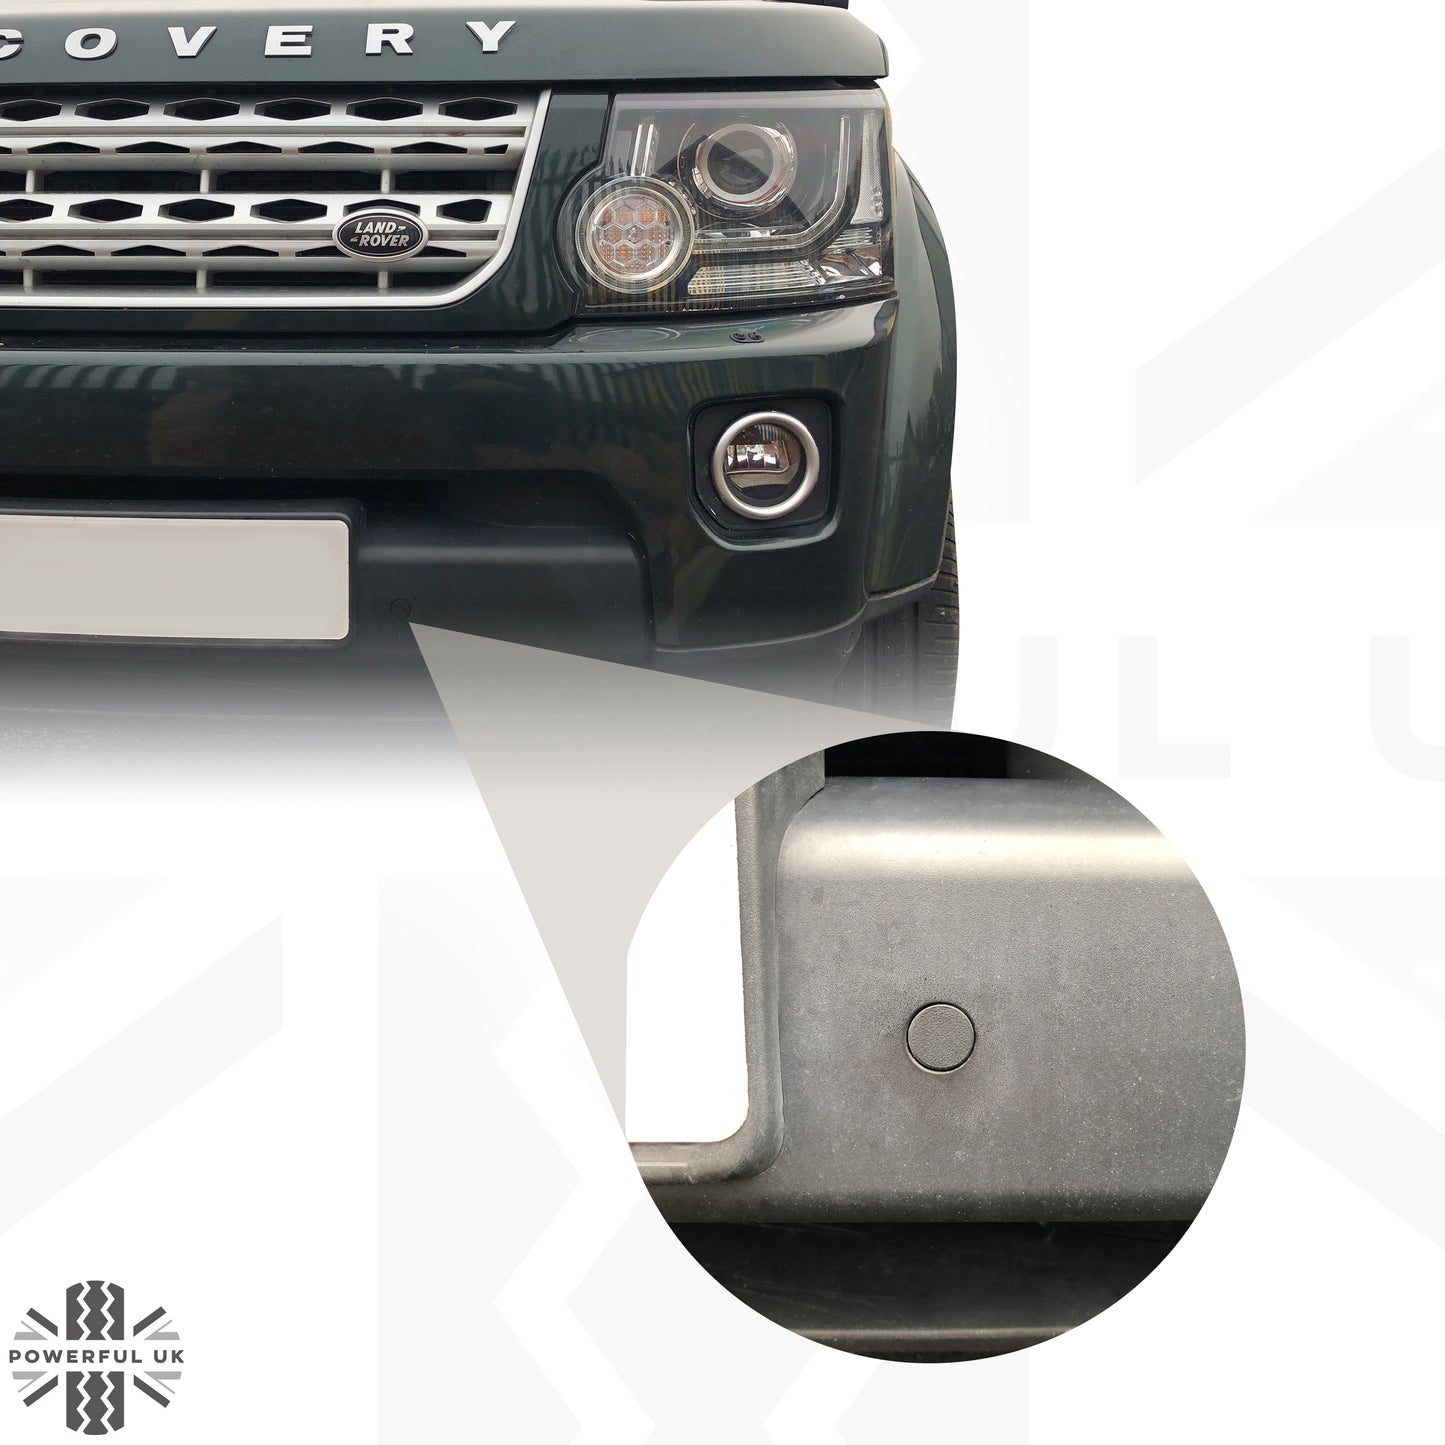 Parking Sensor Cover Stickers x 8 for Land Rover Discovery Sport